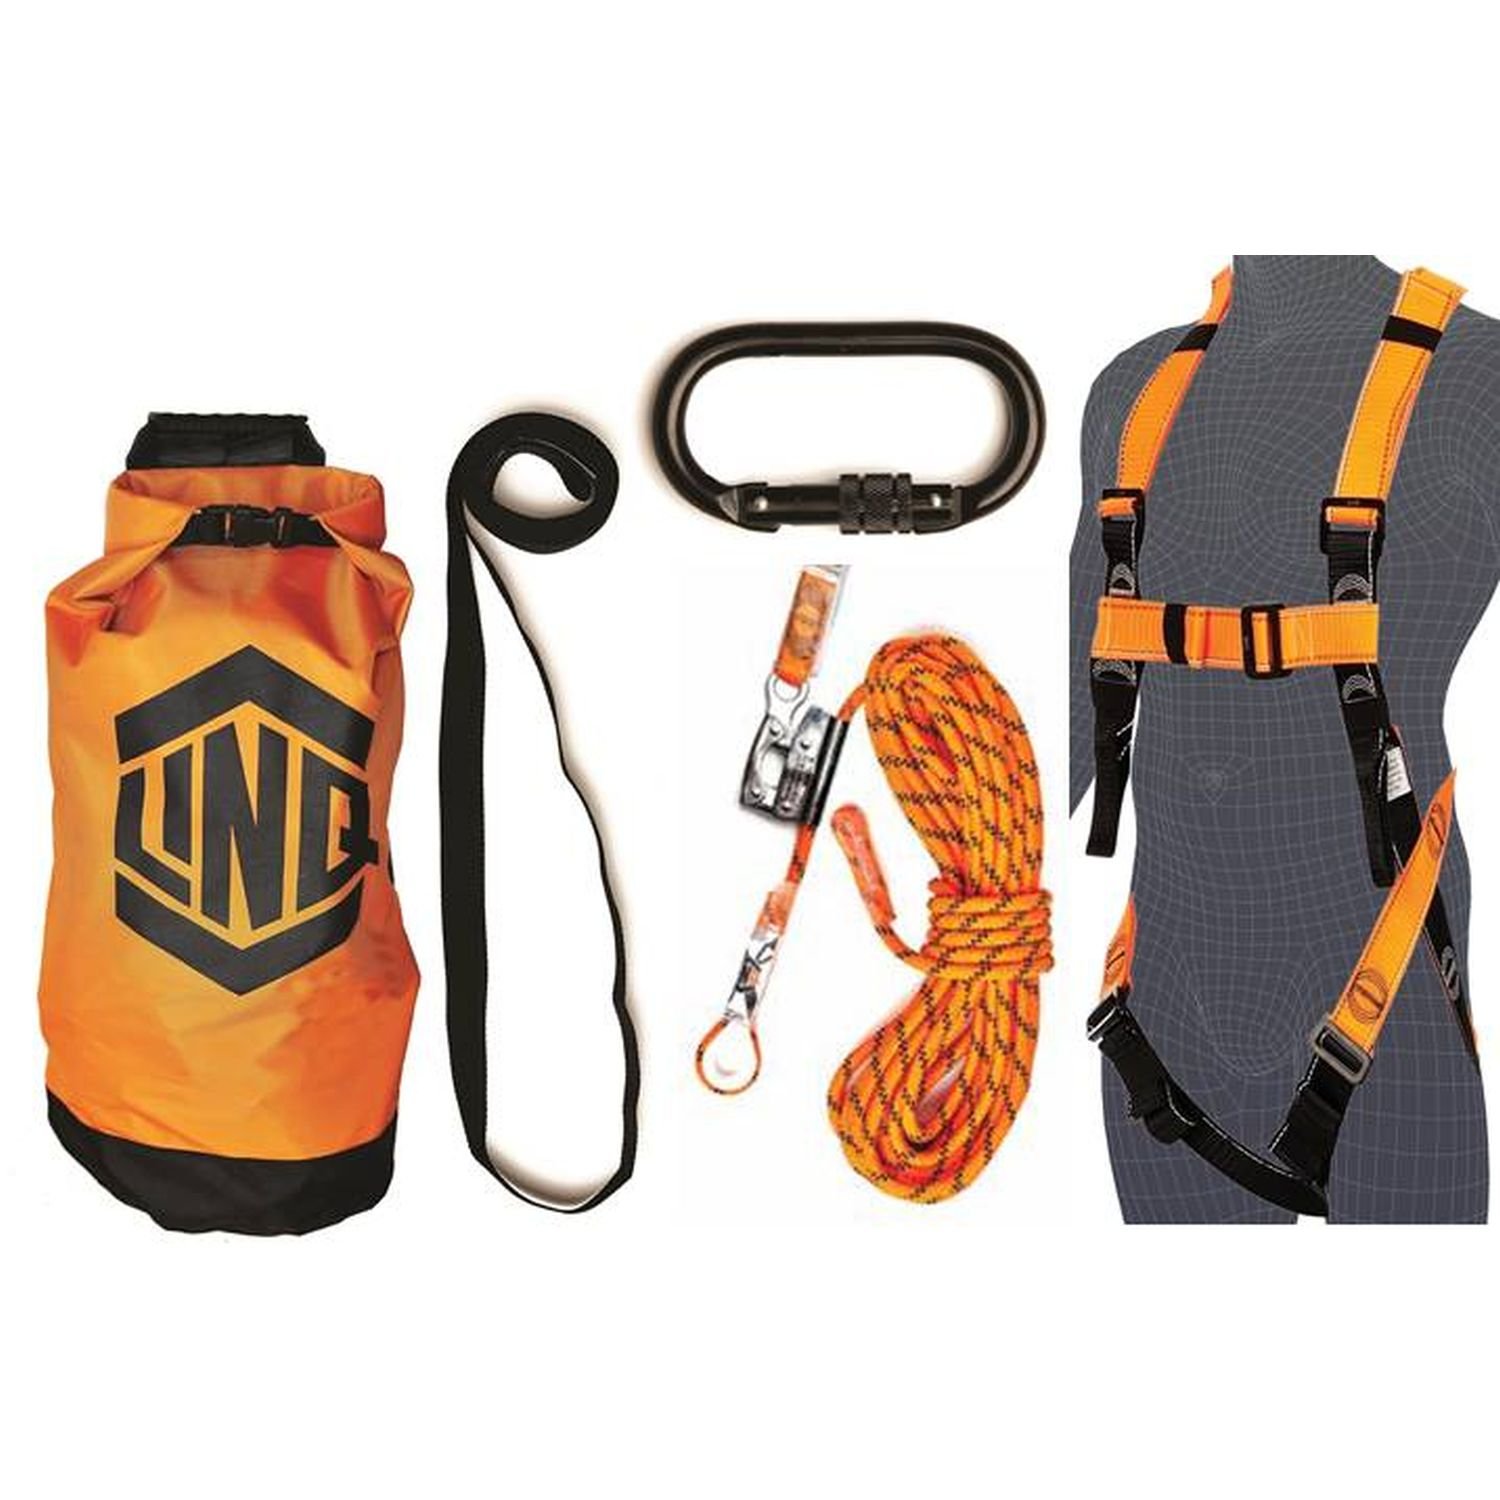 Linq Essential Basic Roofer's Kit 20m Rope & BL102 Harness